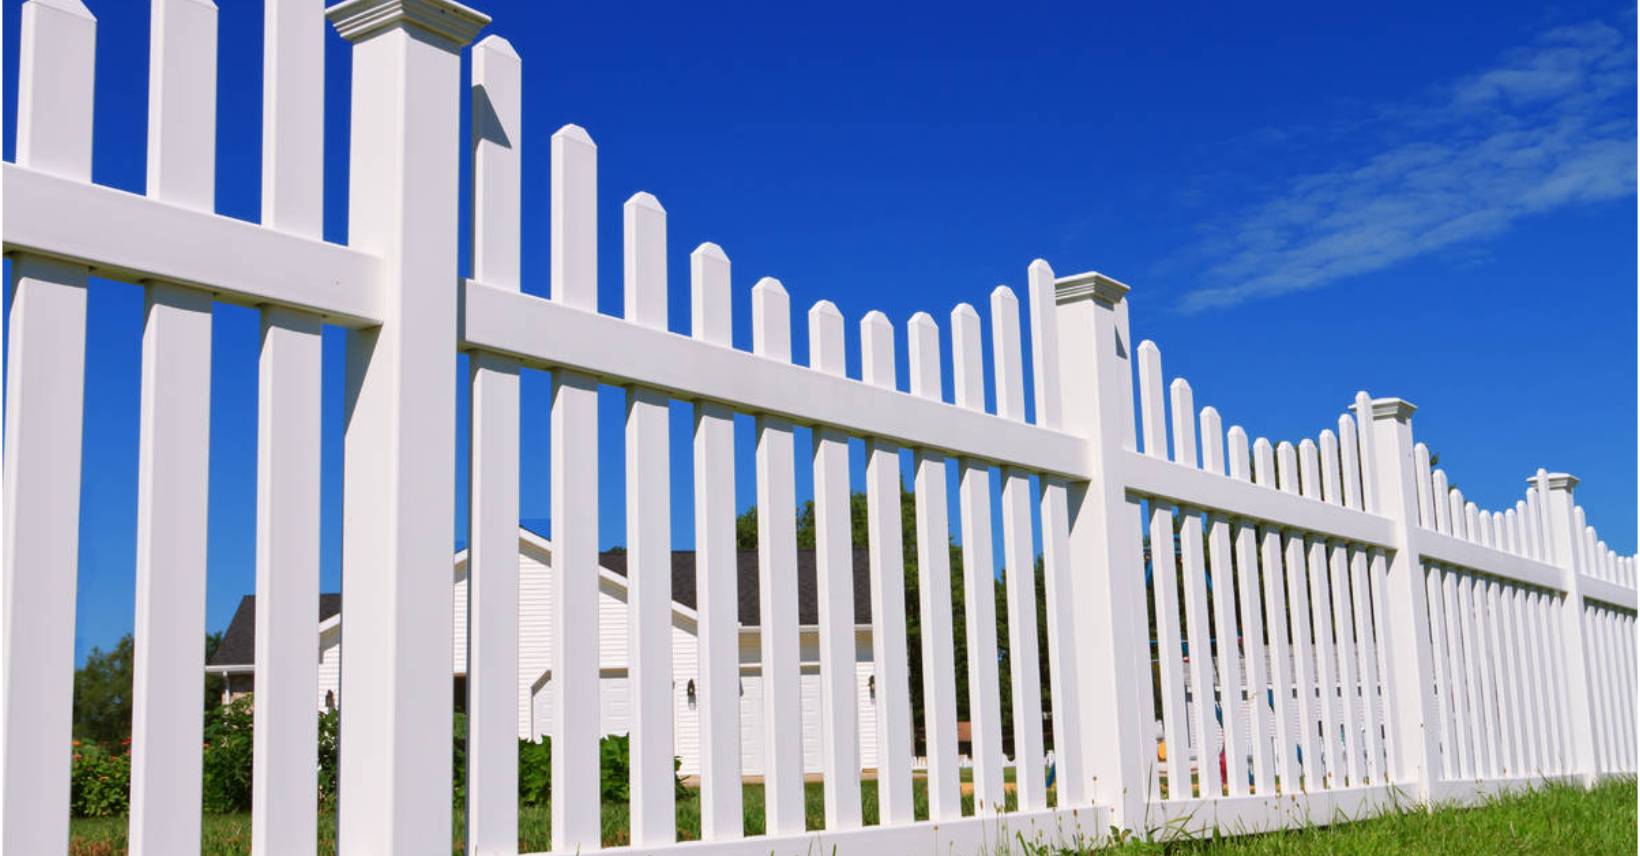 White wooden fence surrounding the landscape of the property